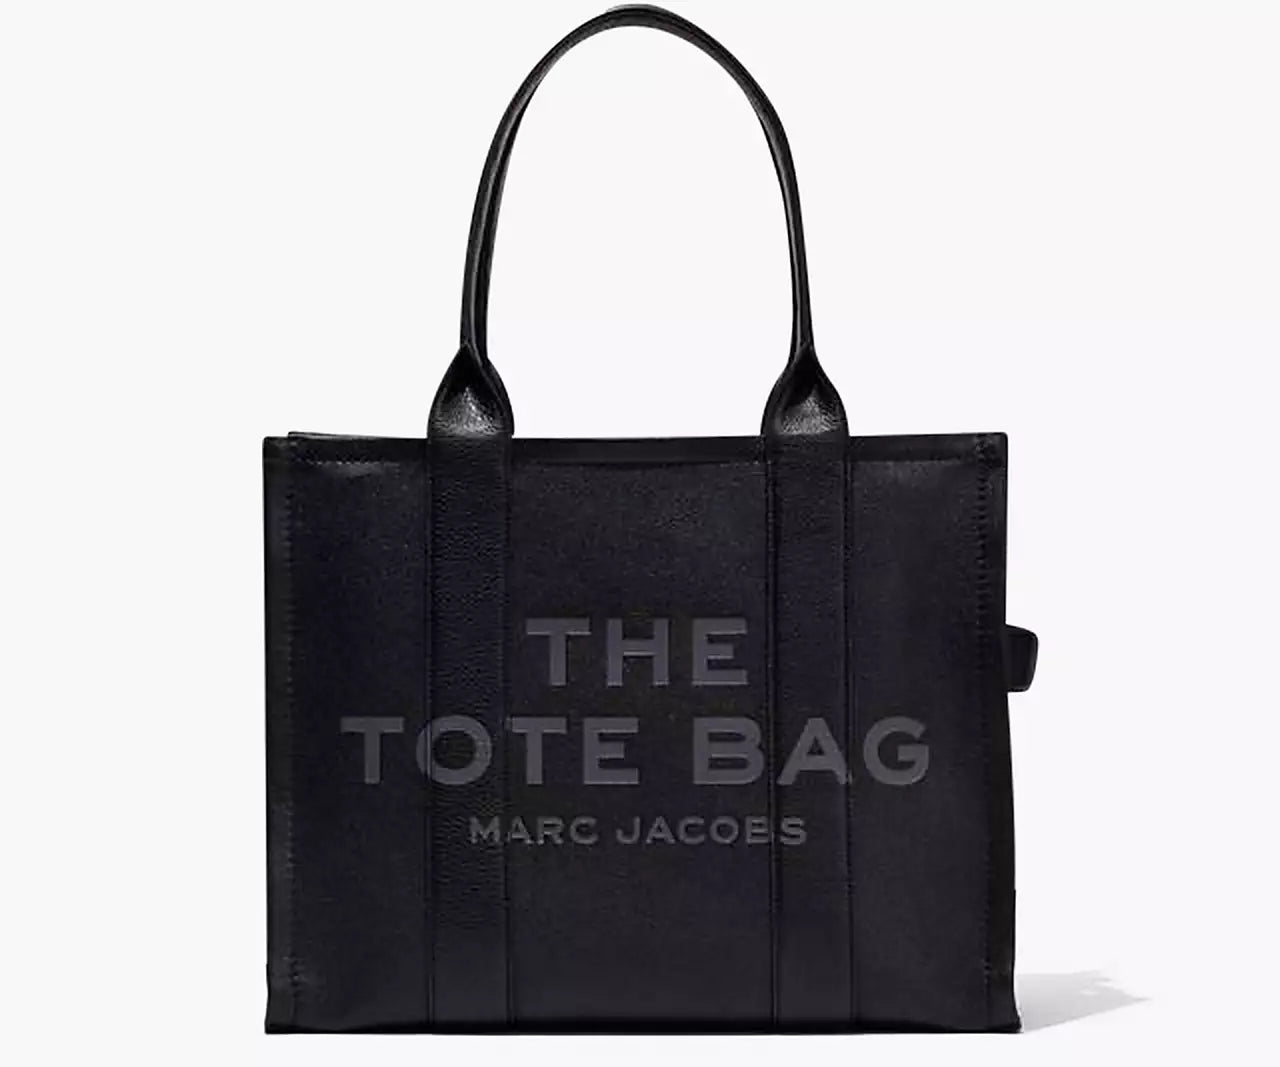 THE LEATHER LARGE TOTE BAG- Black